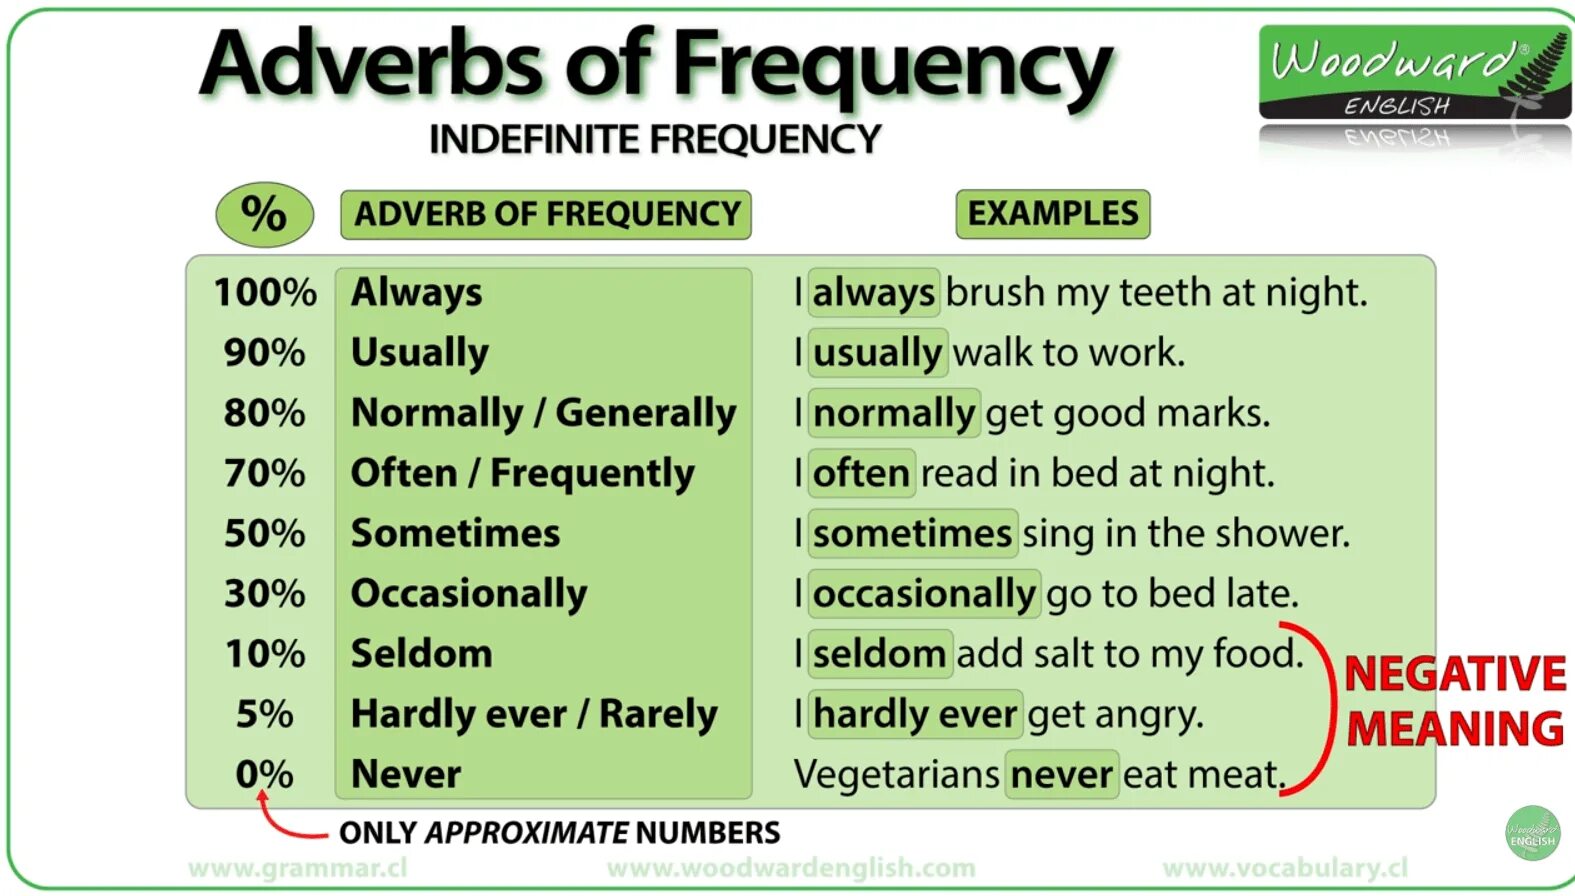 Frequency перевод на русский. Adverbs of Frequency. Adverbs of Frequency in English. Adverbs and expressions of Frequency правило. Frequency adverbs грамматика.